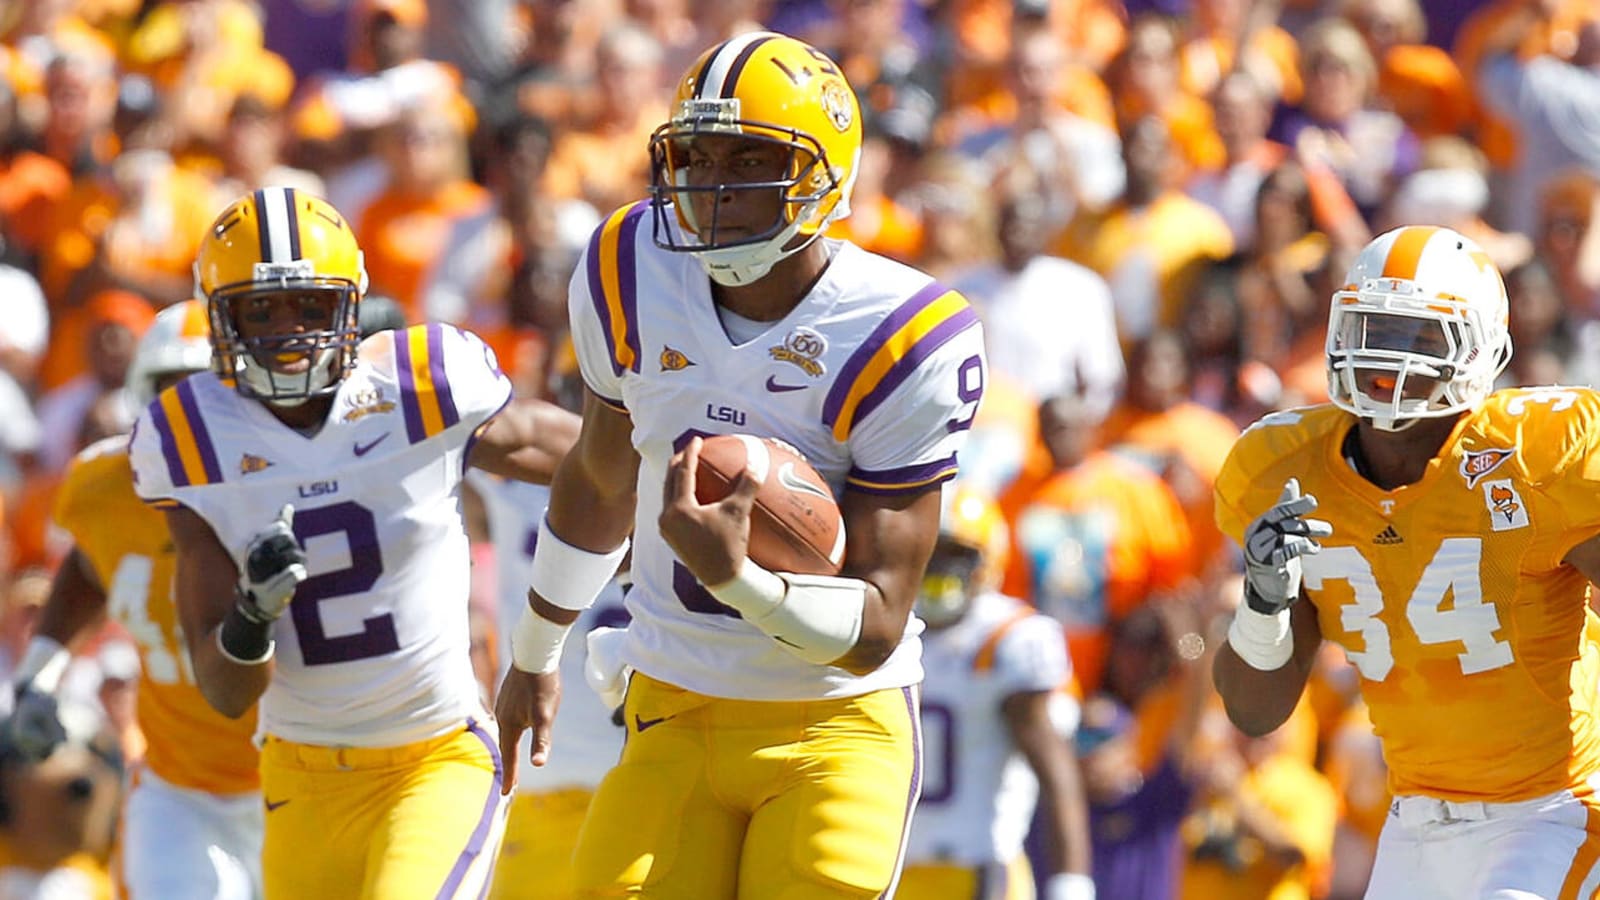 Tennessee travels to Baton Rouge for first time since crushing 2010 defeat